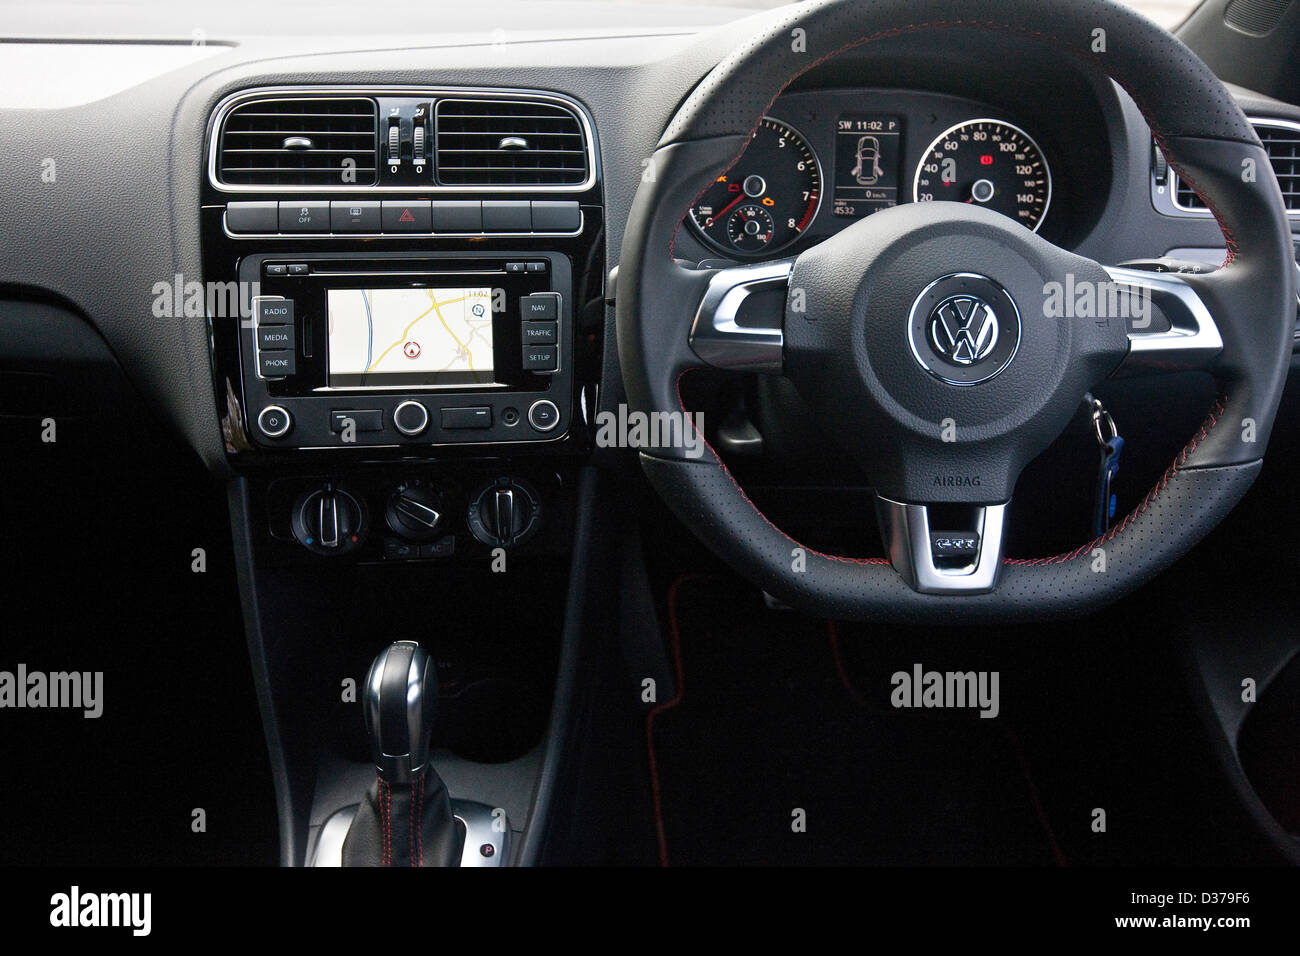 Drivers controls and steering wheel in the VW Volkswagen Polo GTI,  Winchester, England, 15 03 2011 Stock Photo - Alamy